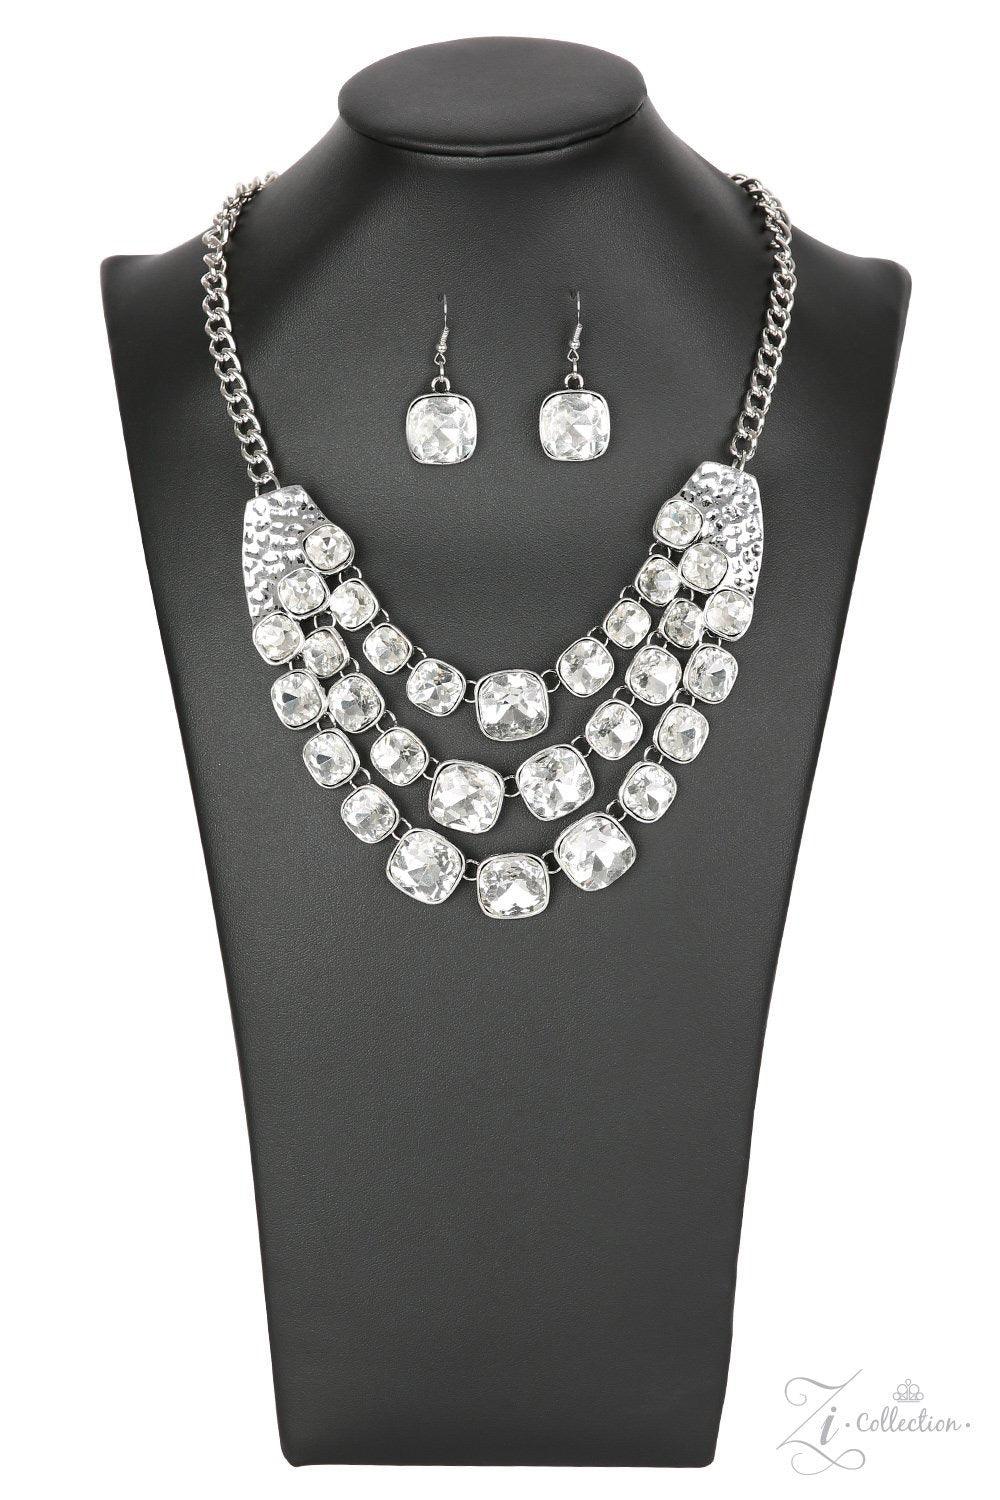 Paparazzi Accessories Unstoppable Two delicately hammered silver fittings give way to three rows of sparkling white rhinestones, each encased in a sleek silver frame. The subtly rounded edges of each glittery gem add a touch of femininity to the bold desi